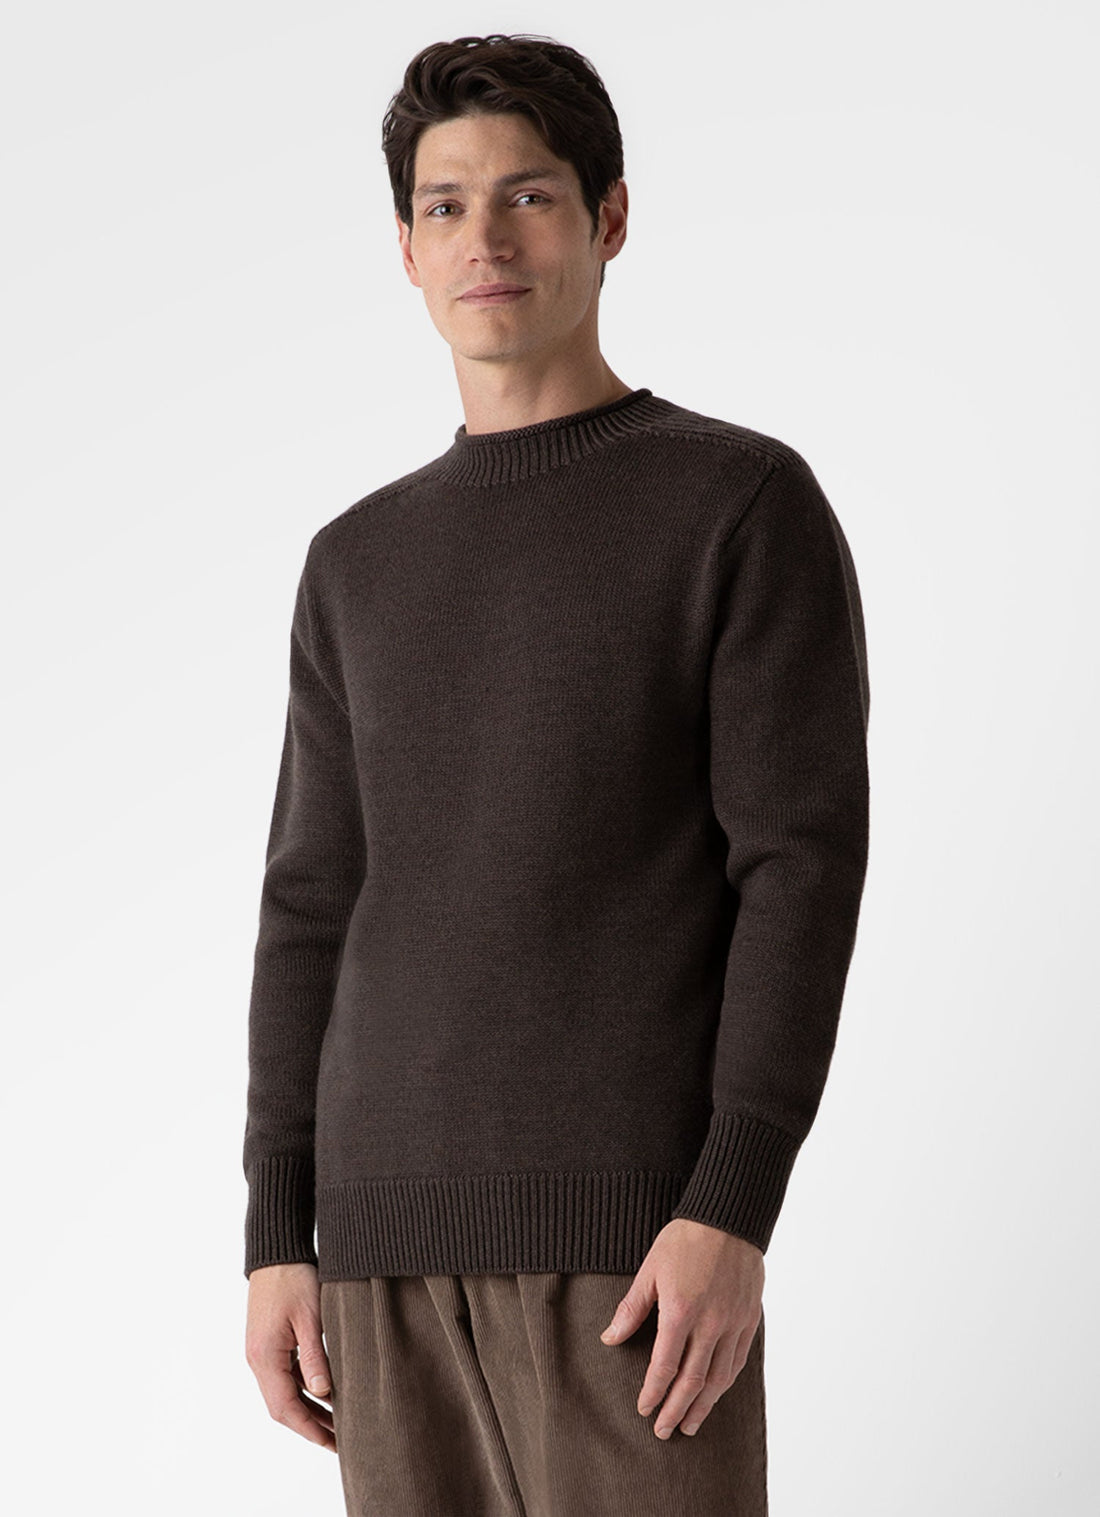 Merino Wool Raglan Sweater with Elbow Patches - Charcoal - Men's